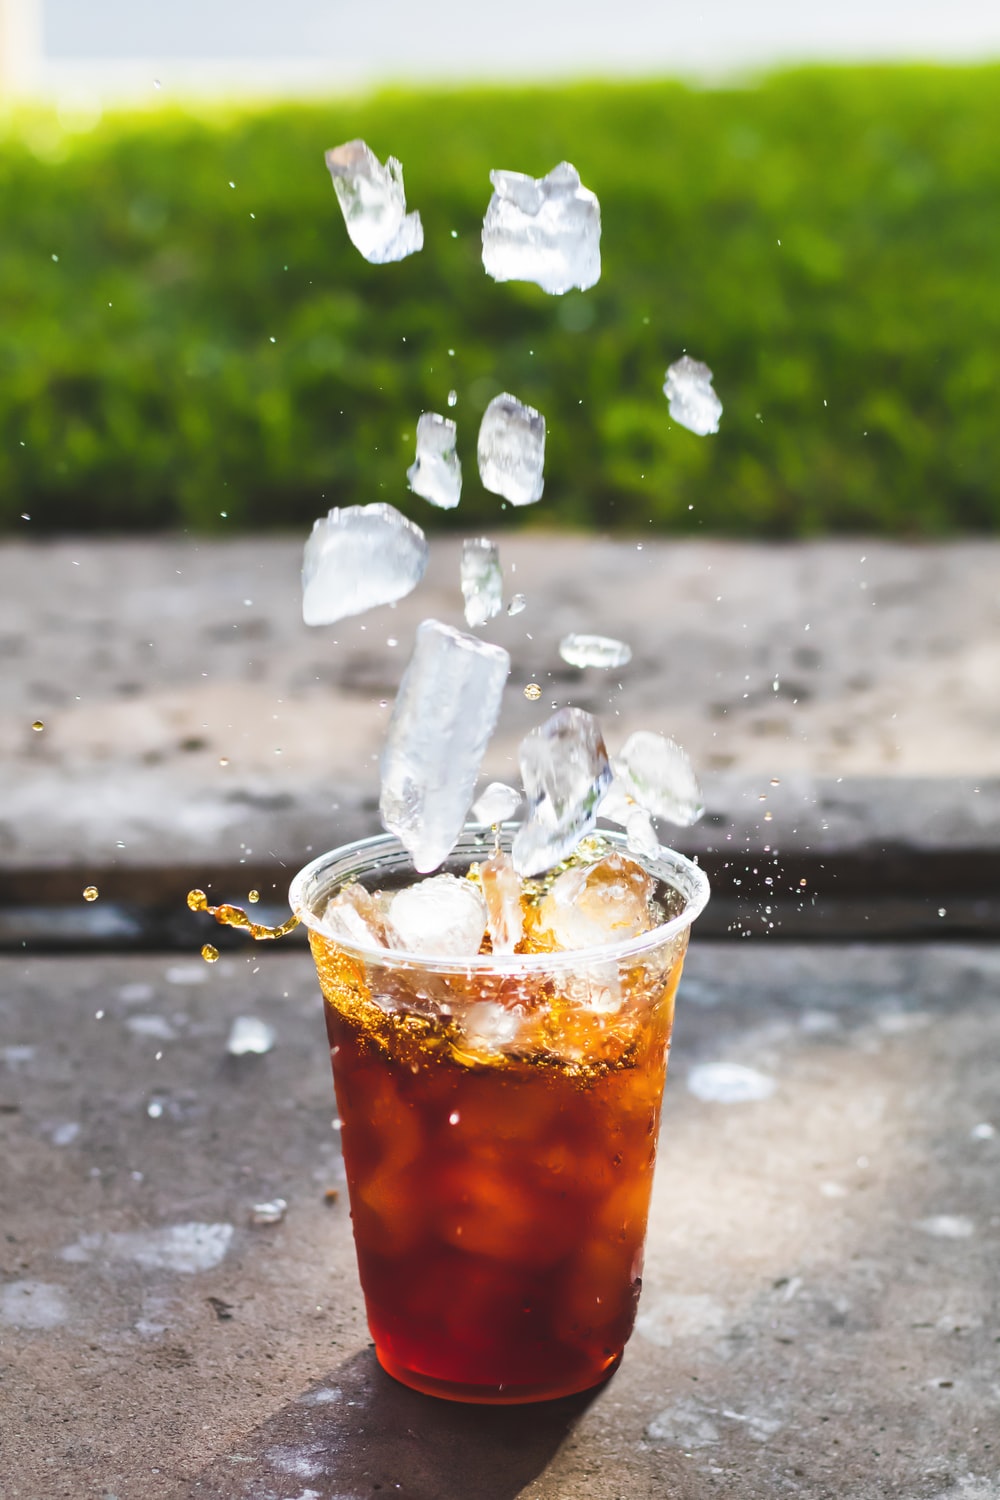 Iced Americano Picture. Download Free Image